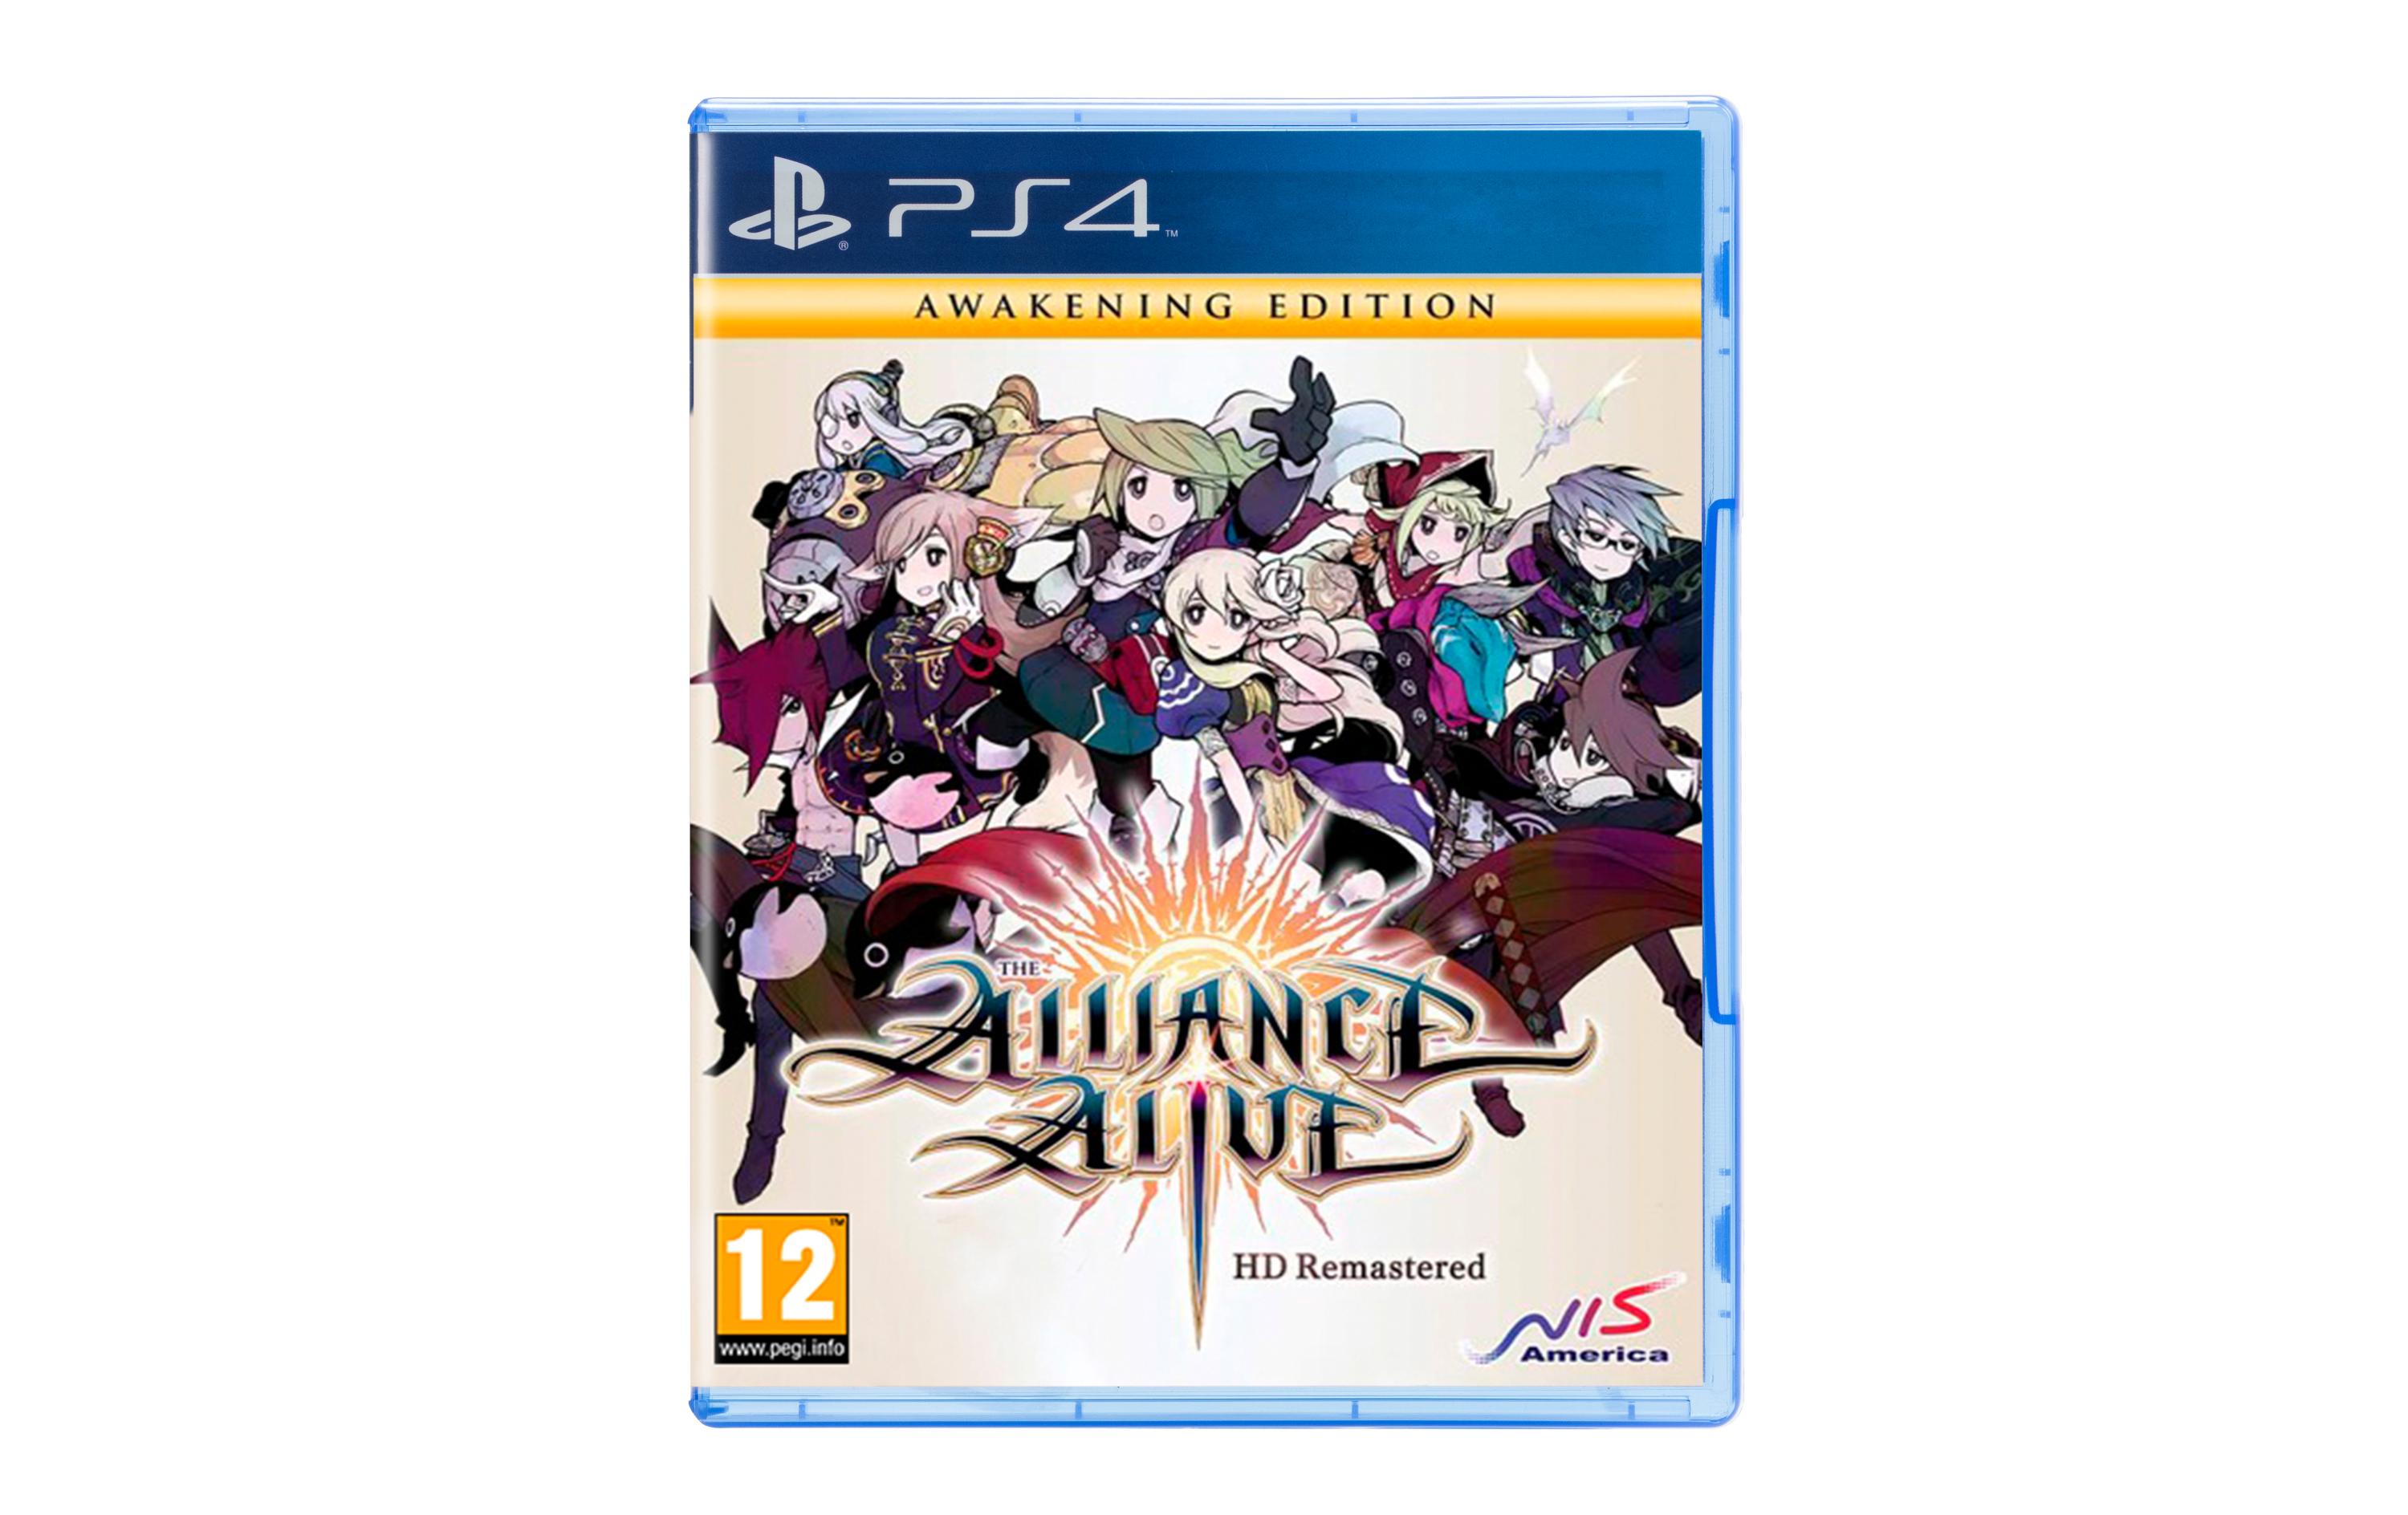 GAME The Alliance Alive HD Remastered - Awakening Edition